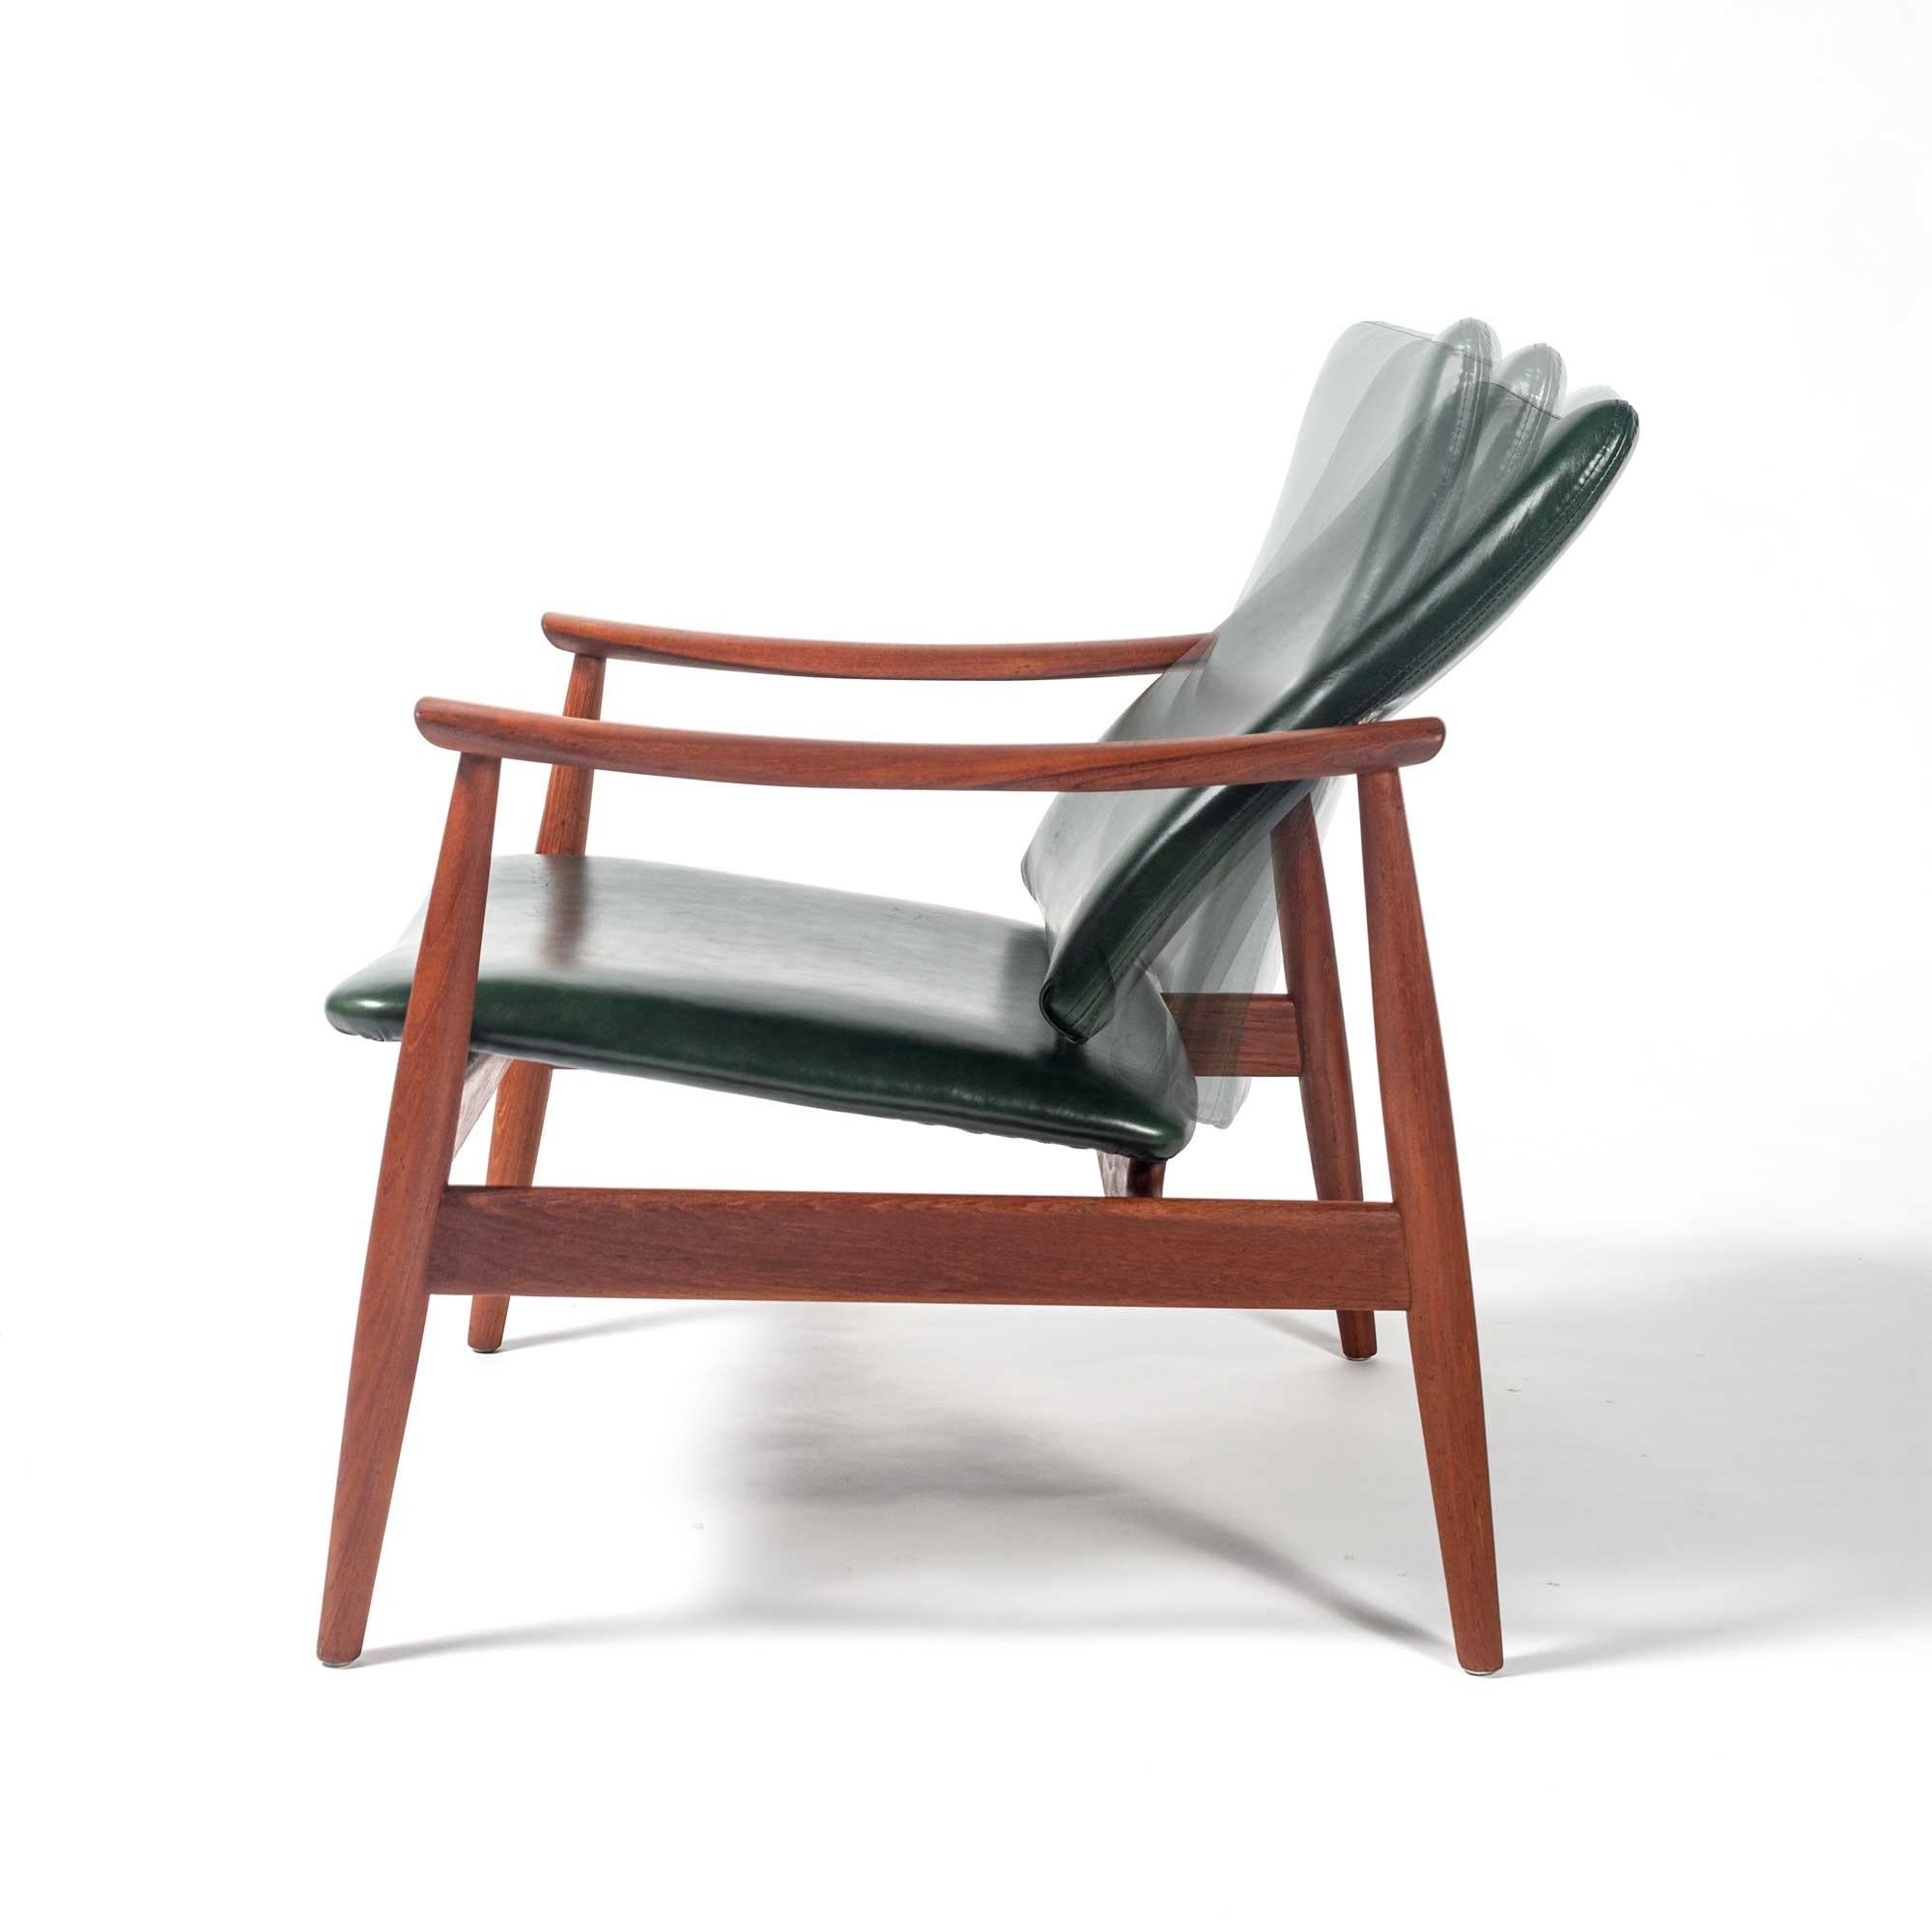 Mid-20th Century Finn Juhl For Frances & Son Easy Chair FD138 in Teak and Green Leather